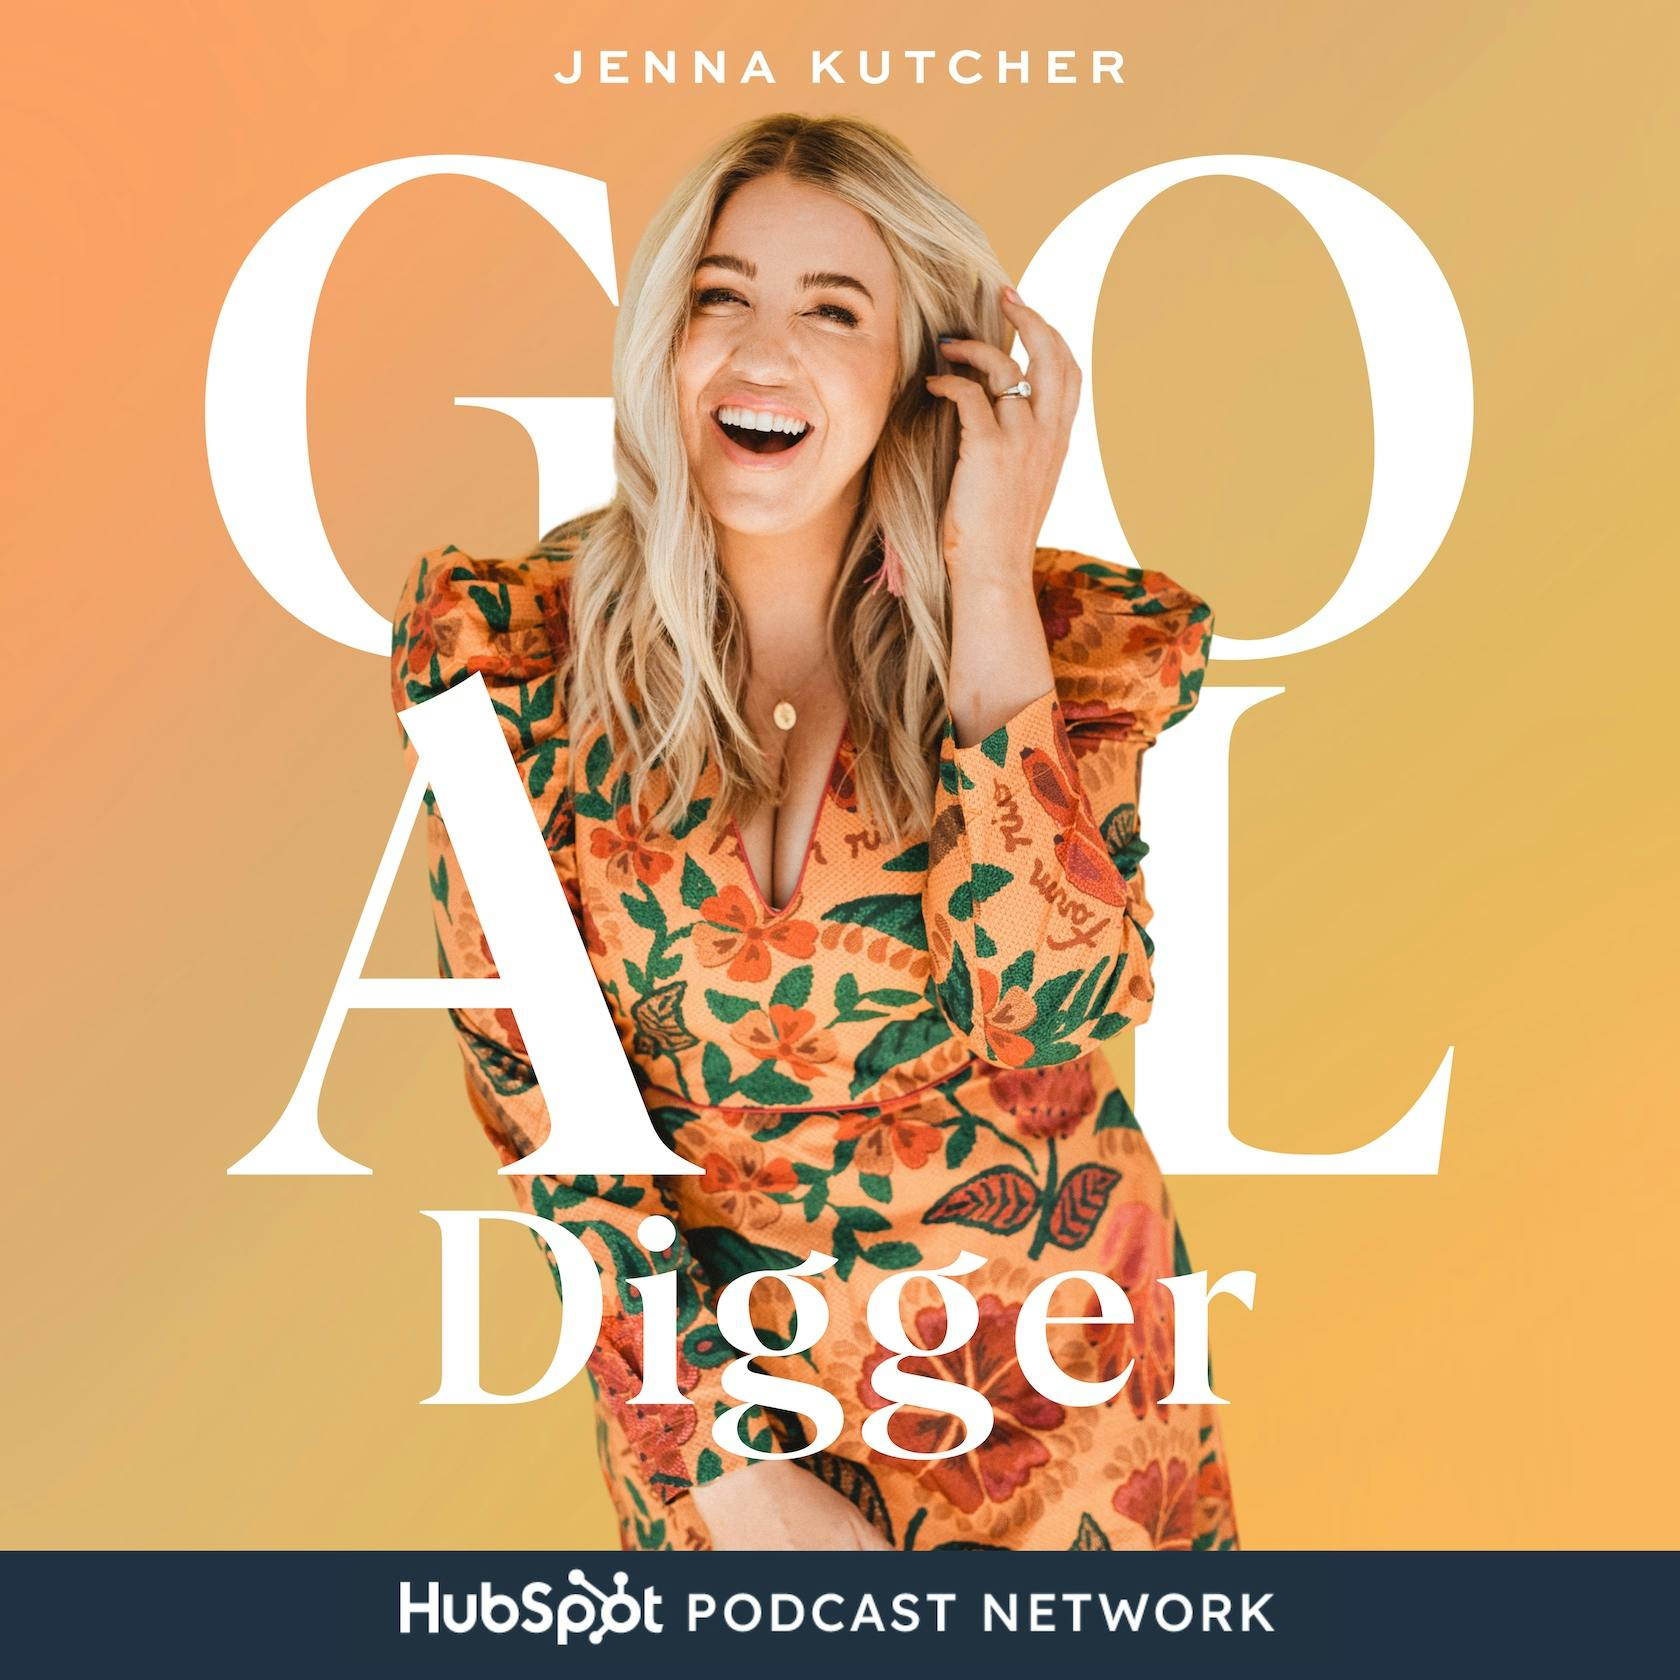 605: How to Ditch the Perfectionism and Embrace Your Non-Linear Path